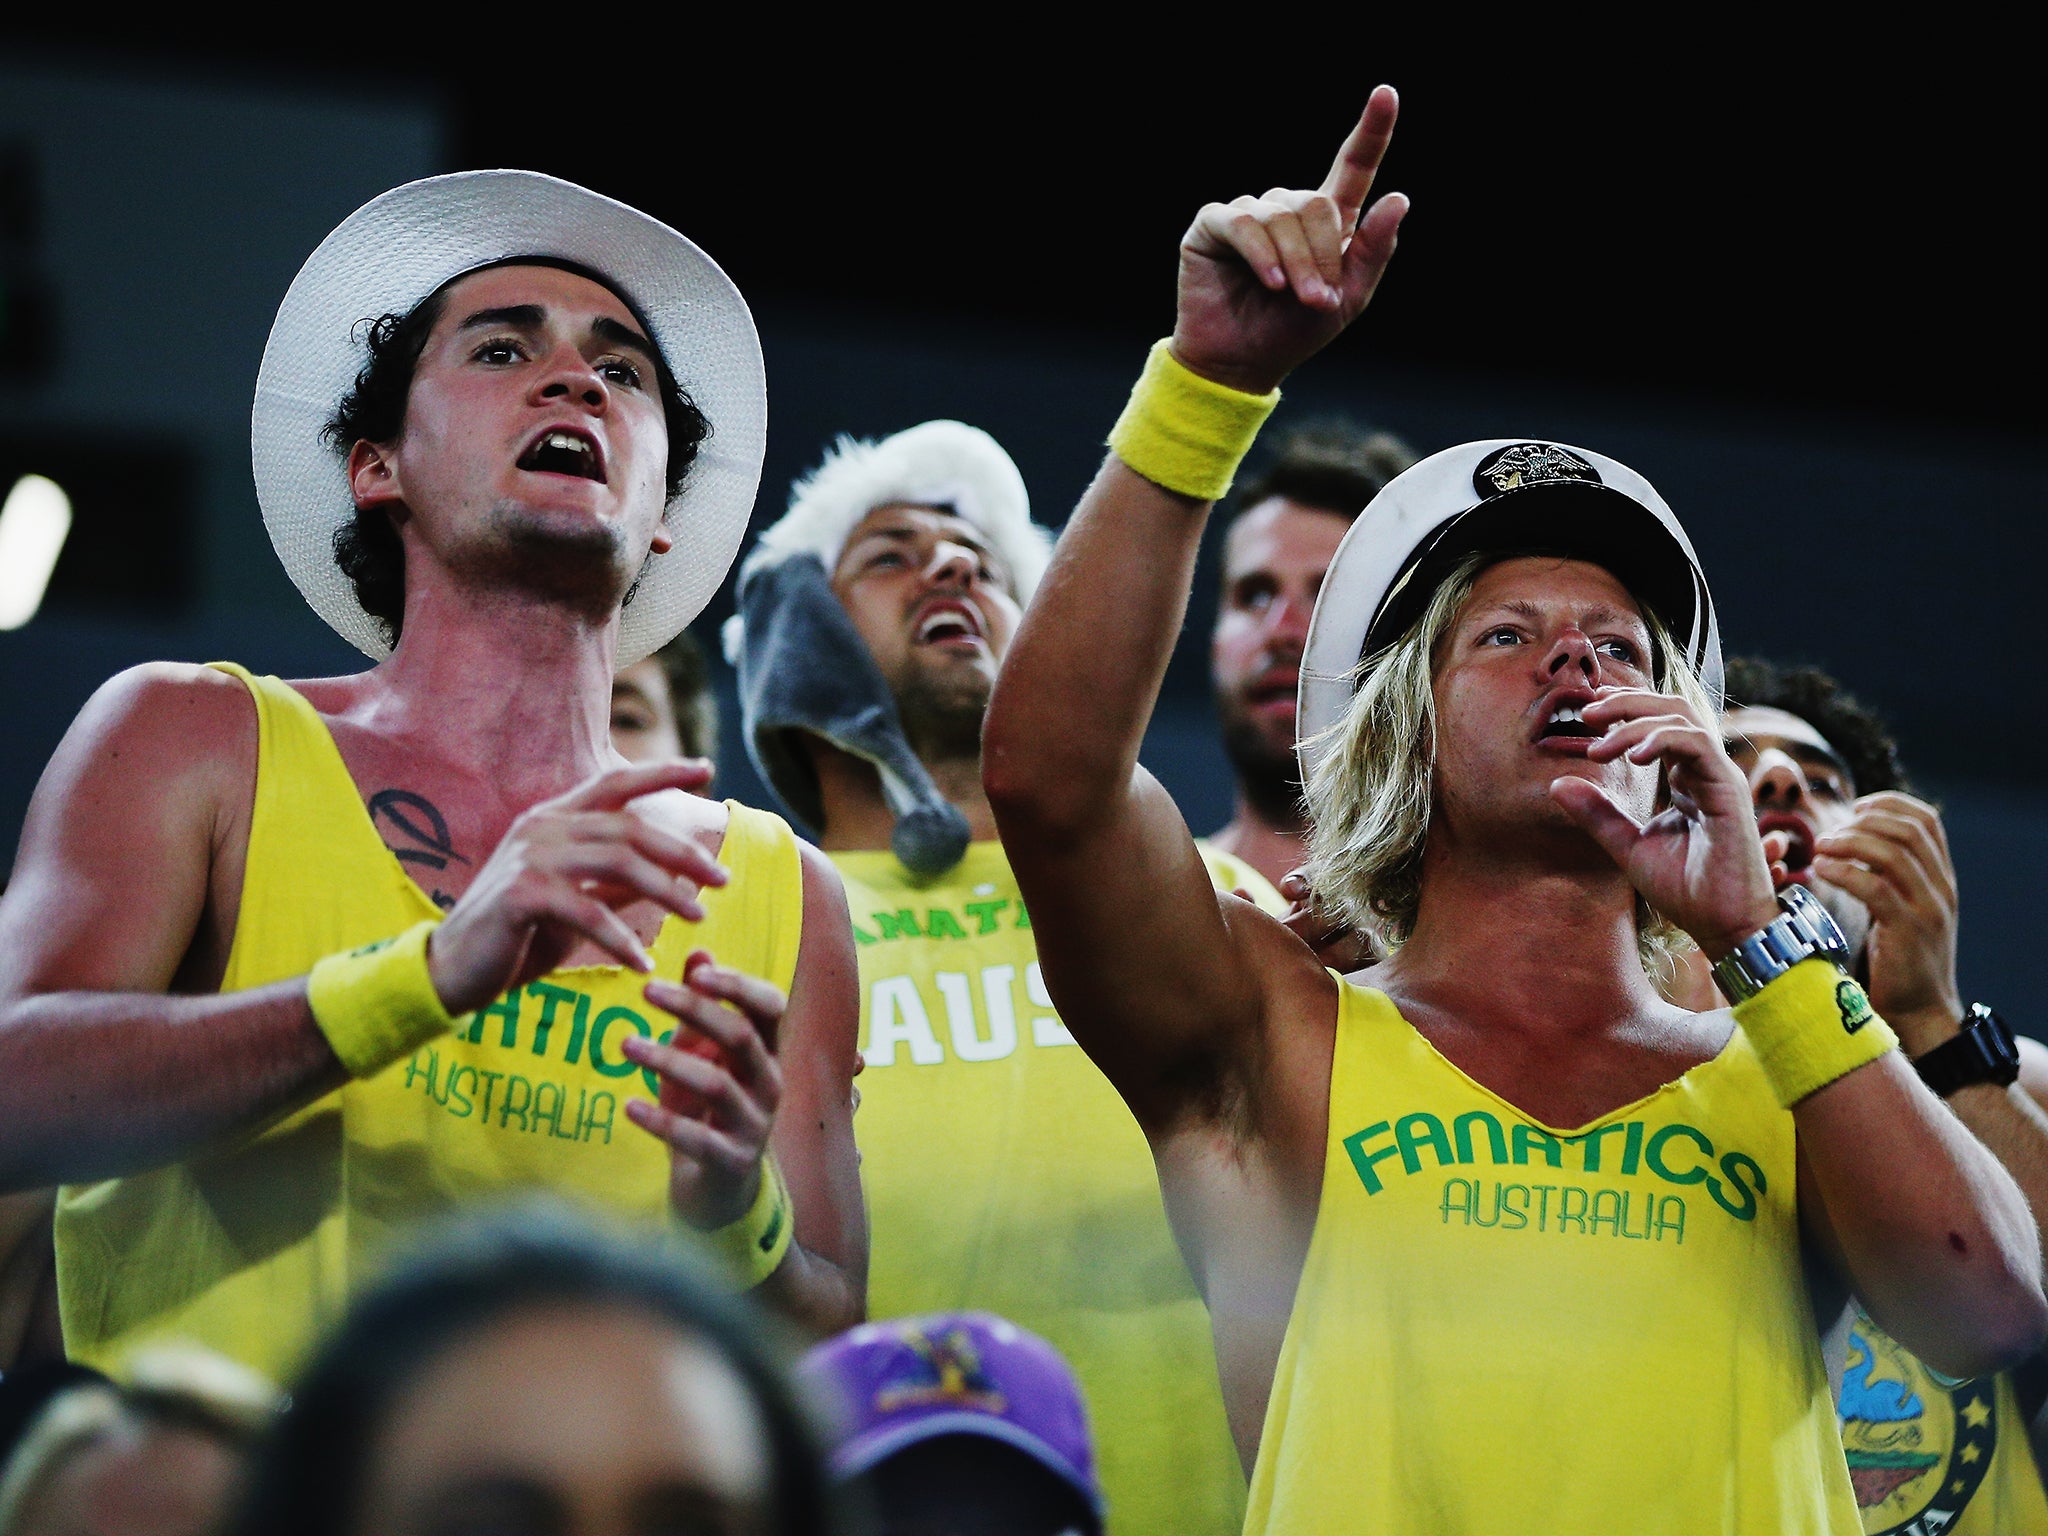 Australian fans cheer on during the first round match between Nick Kyrgios of Australia and Federico Delbonis of Argentina